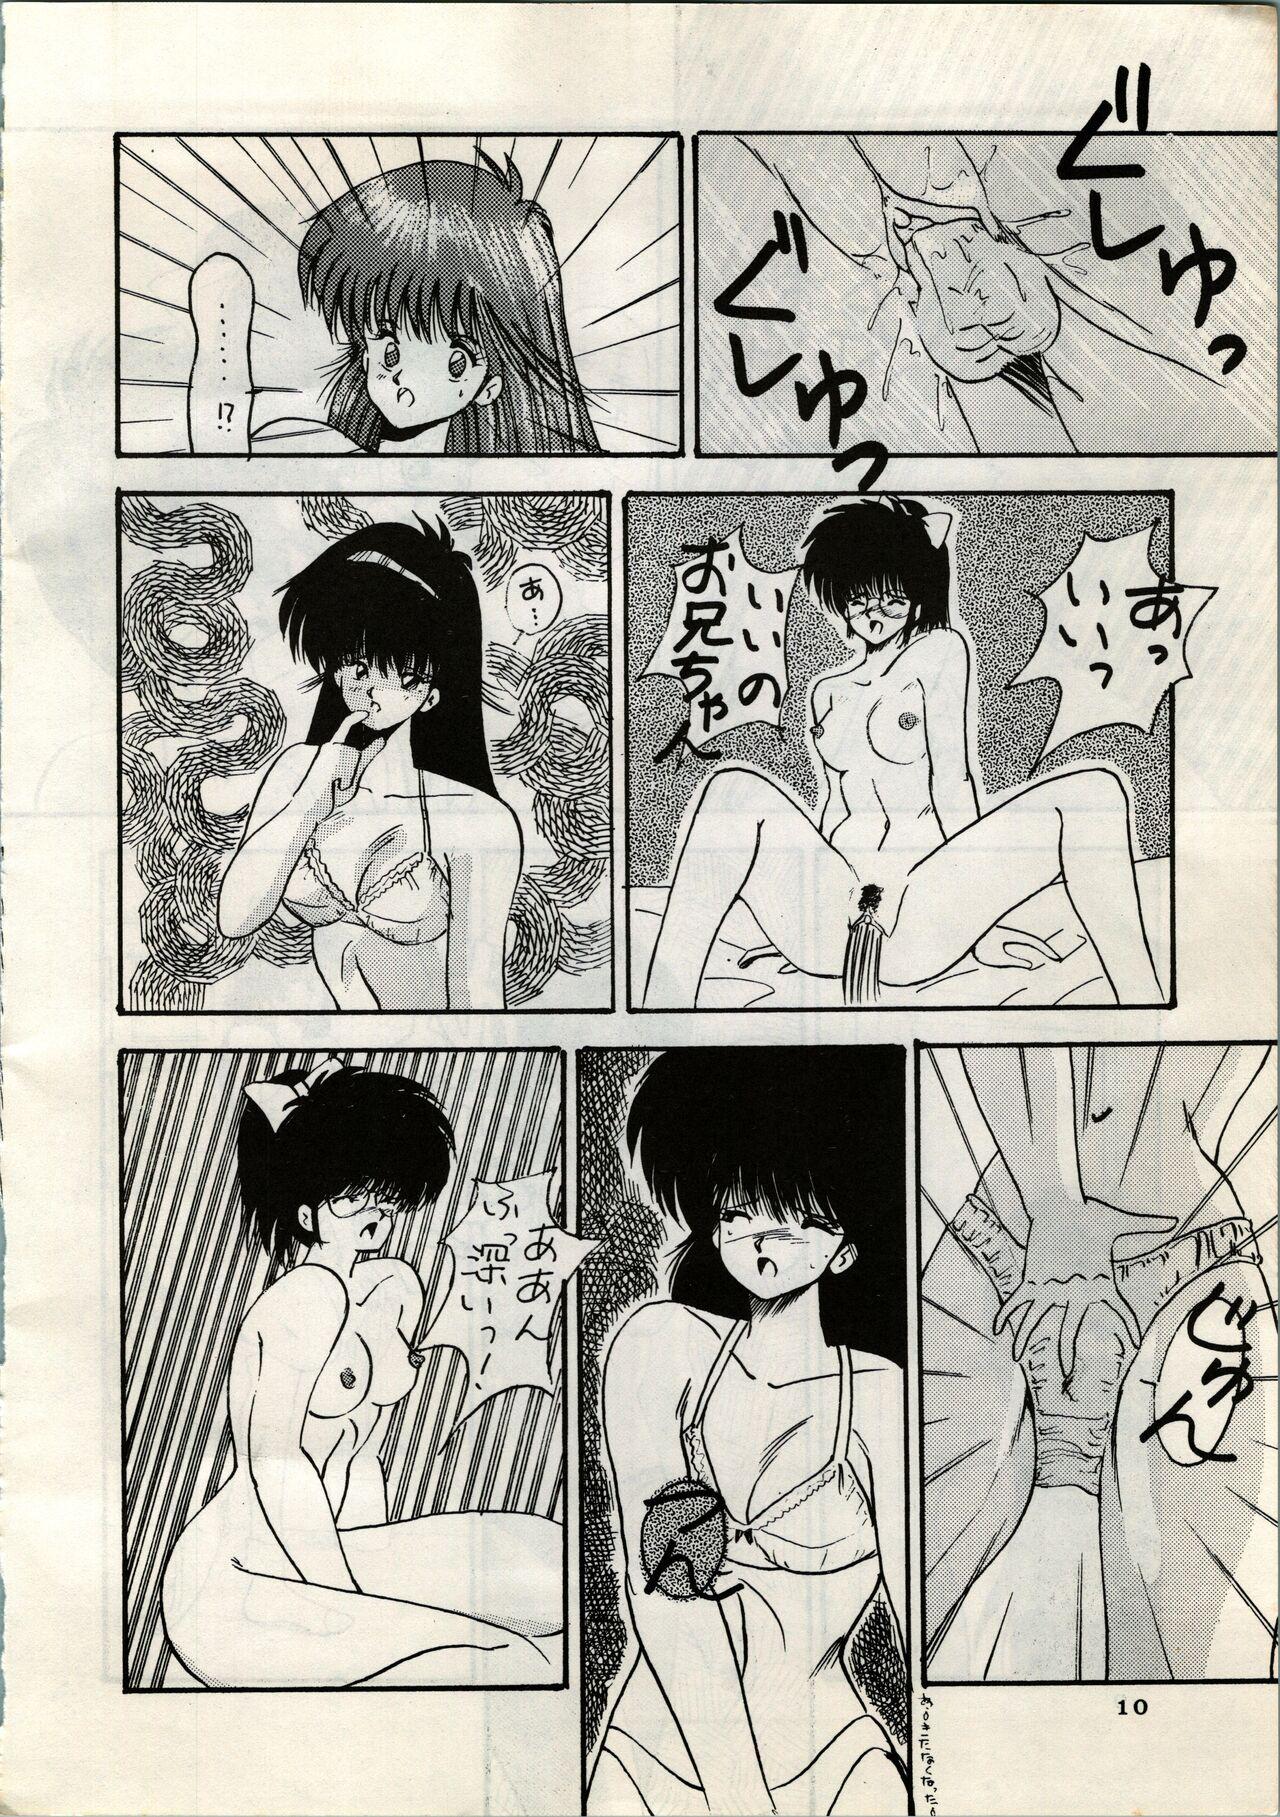 Sex Tape OUTER WORLD Vol.4 - Kimagure orange road 3x3 eyes Ano - Page 12